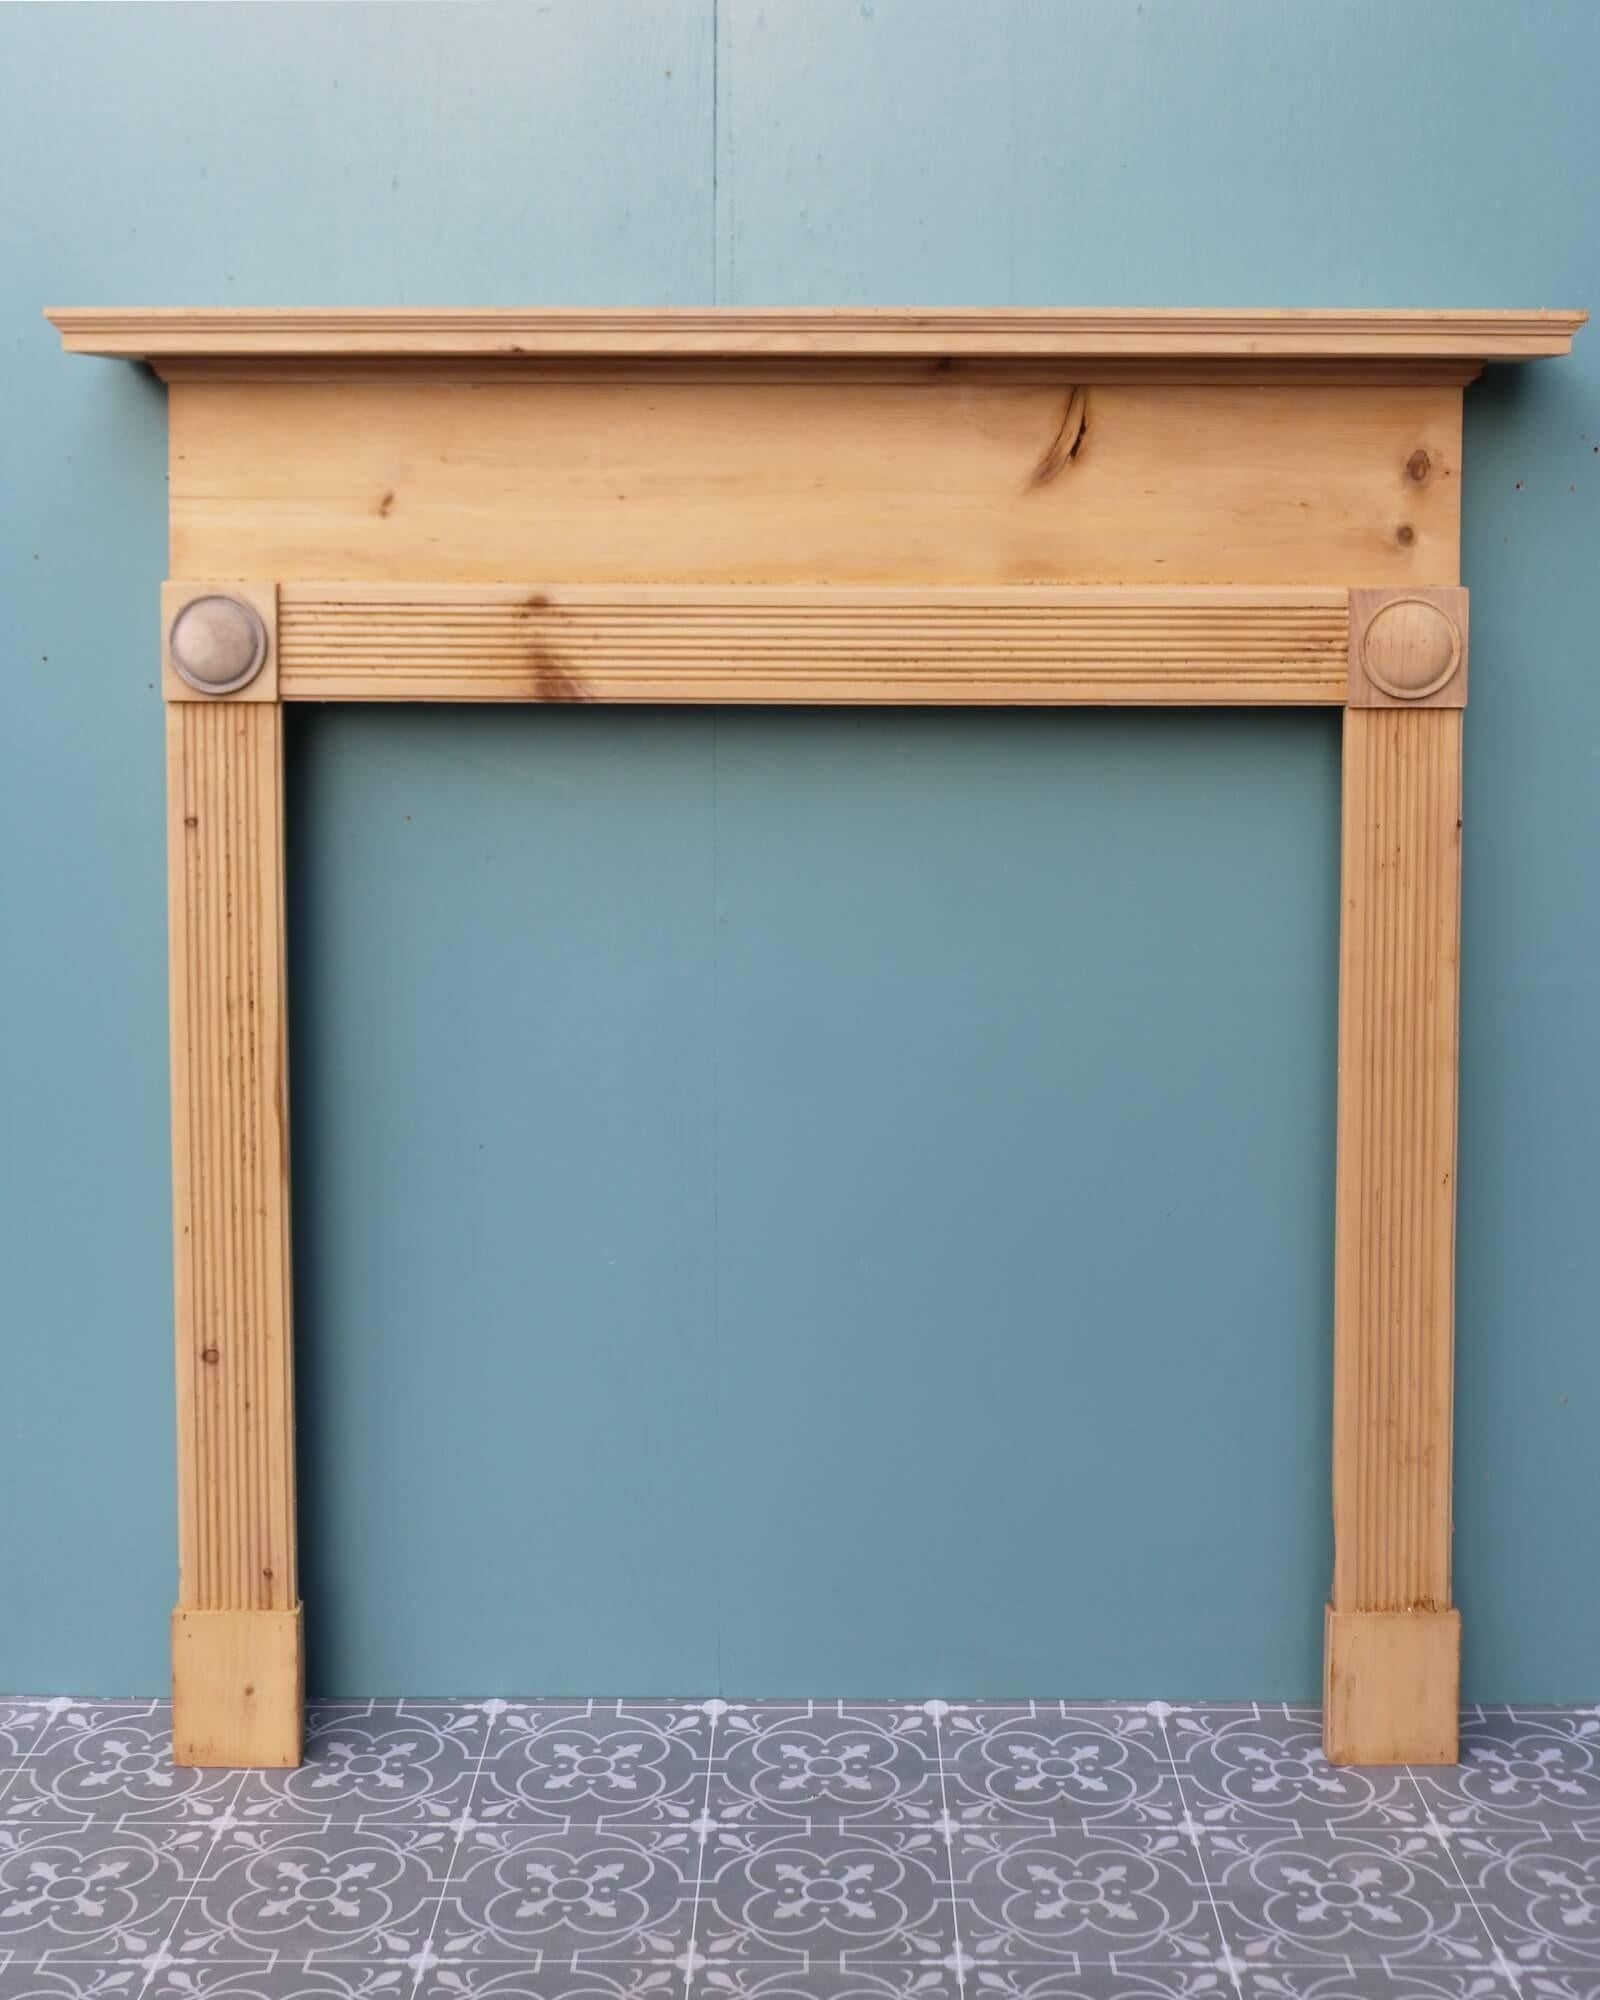 Though this antique English fireplace dates from the cusp of the 20th century, its design draws influence from bullseye fireplaces of the earlier Georgian and Regency periods. Crafted in pine, it is stripped, sanded and ready for finishing in a